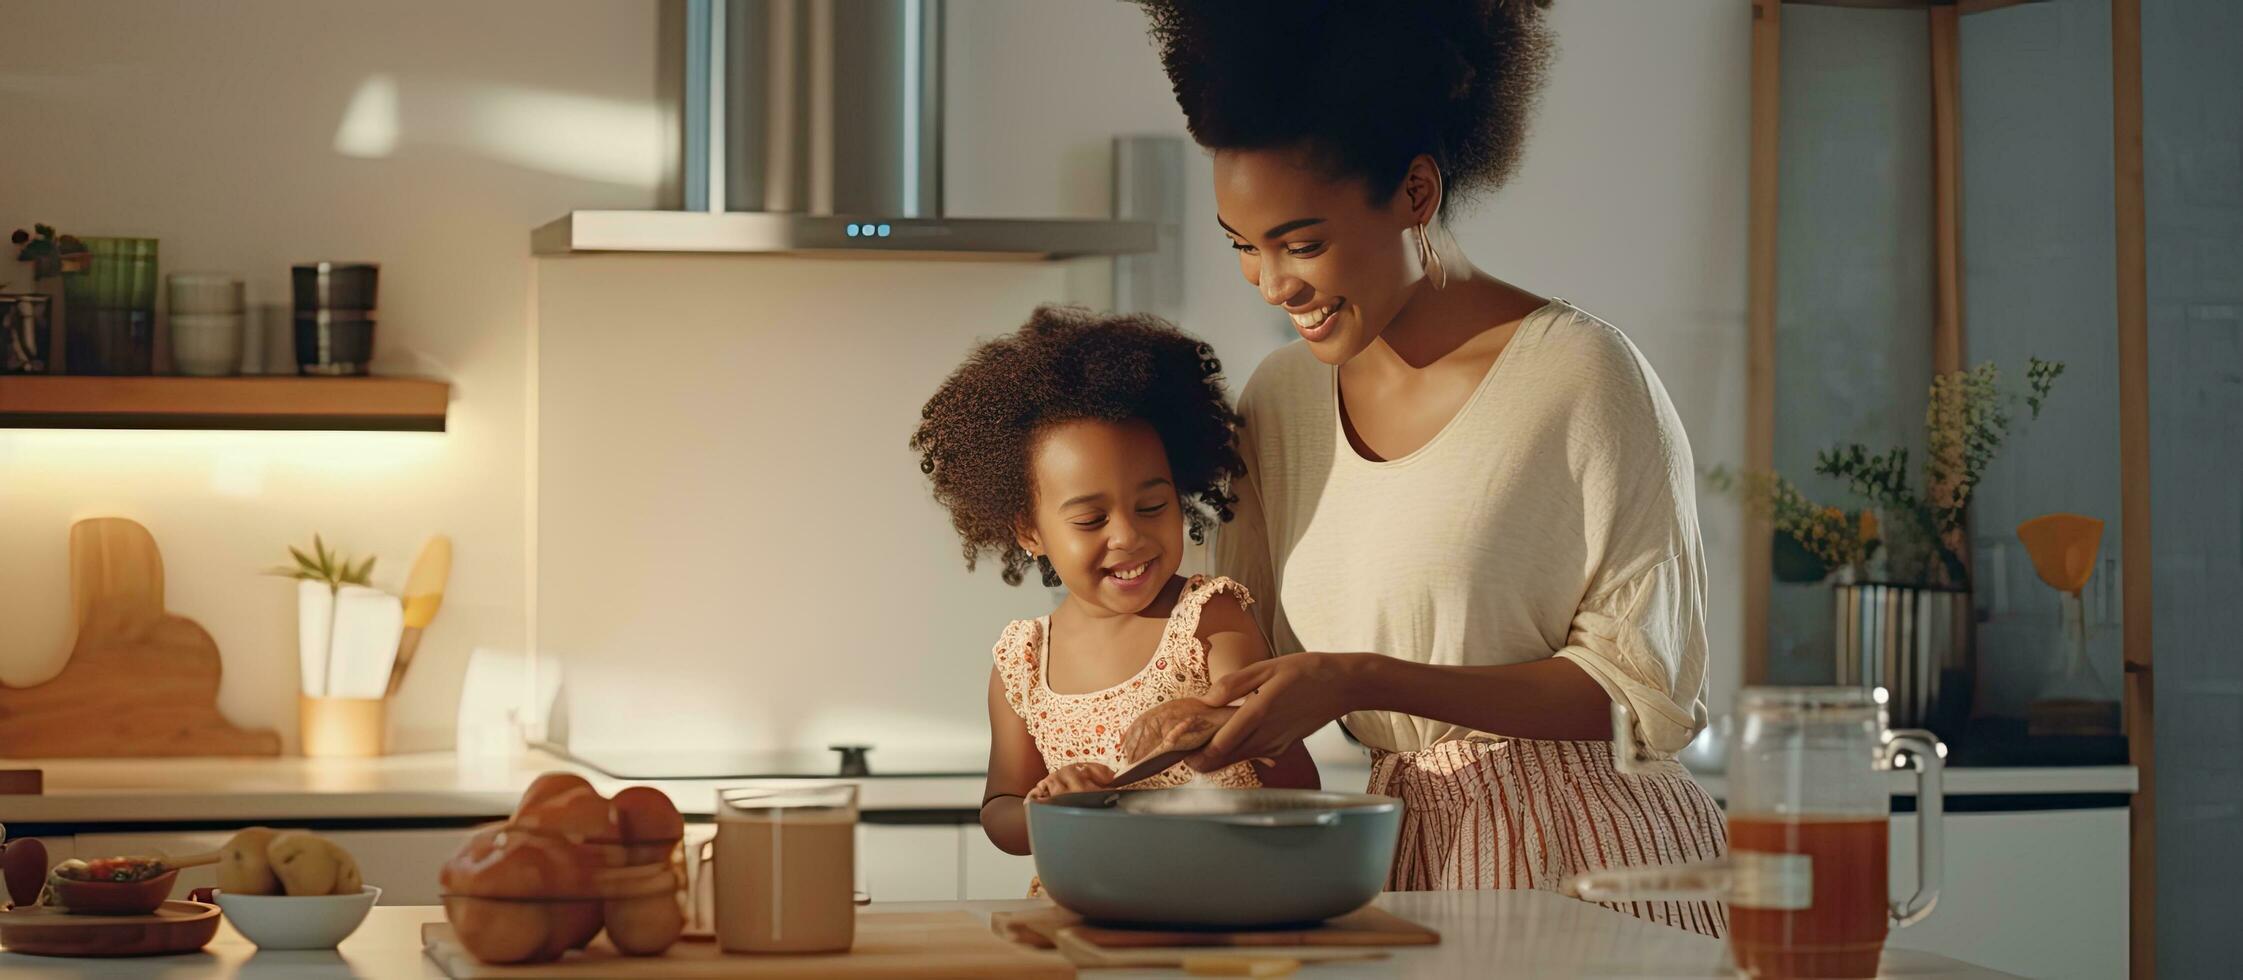 African American mother joyfully cooking in kitchen with baby on hands preparing healthy food stirring with spatula photo